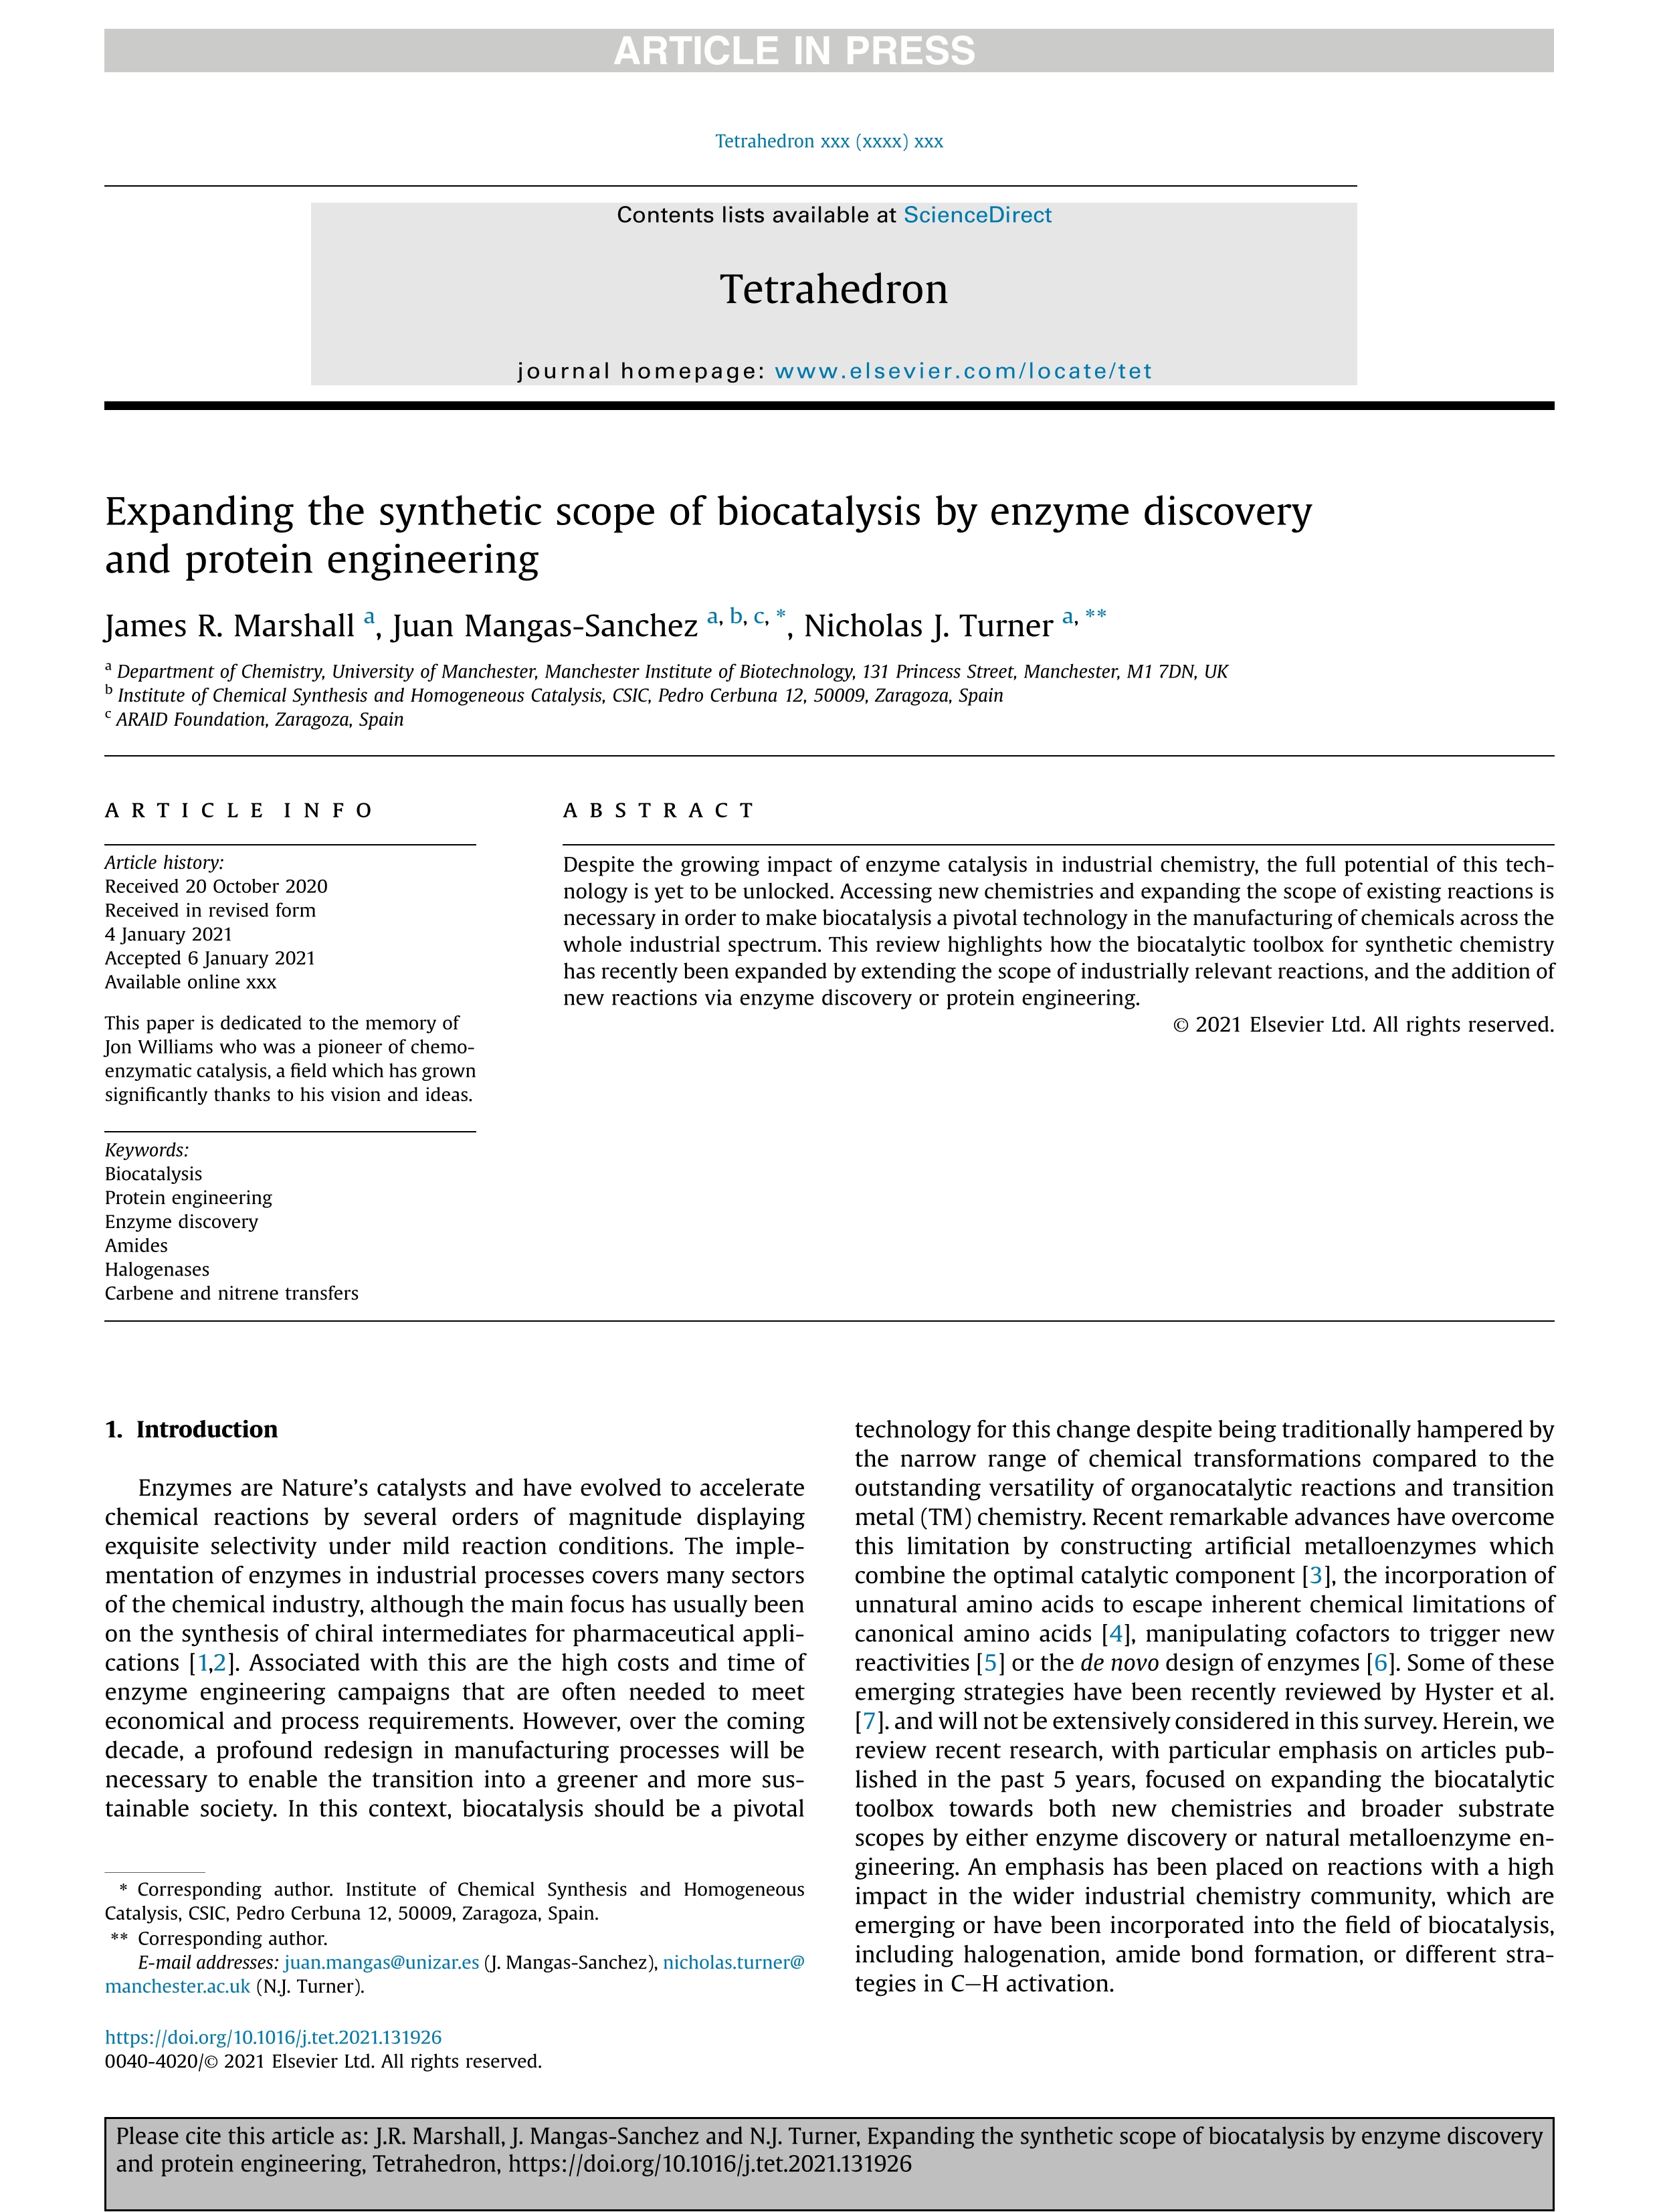 Expanding the synthetic scope of biocatalysis by enzyme discovery and protein engineering